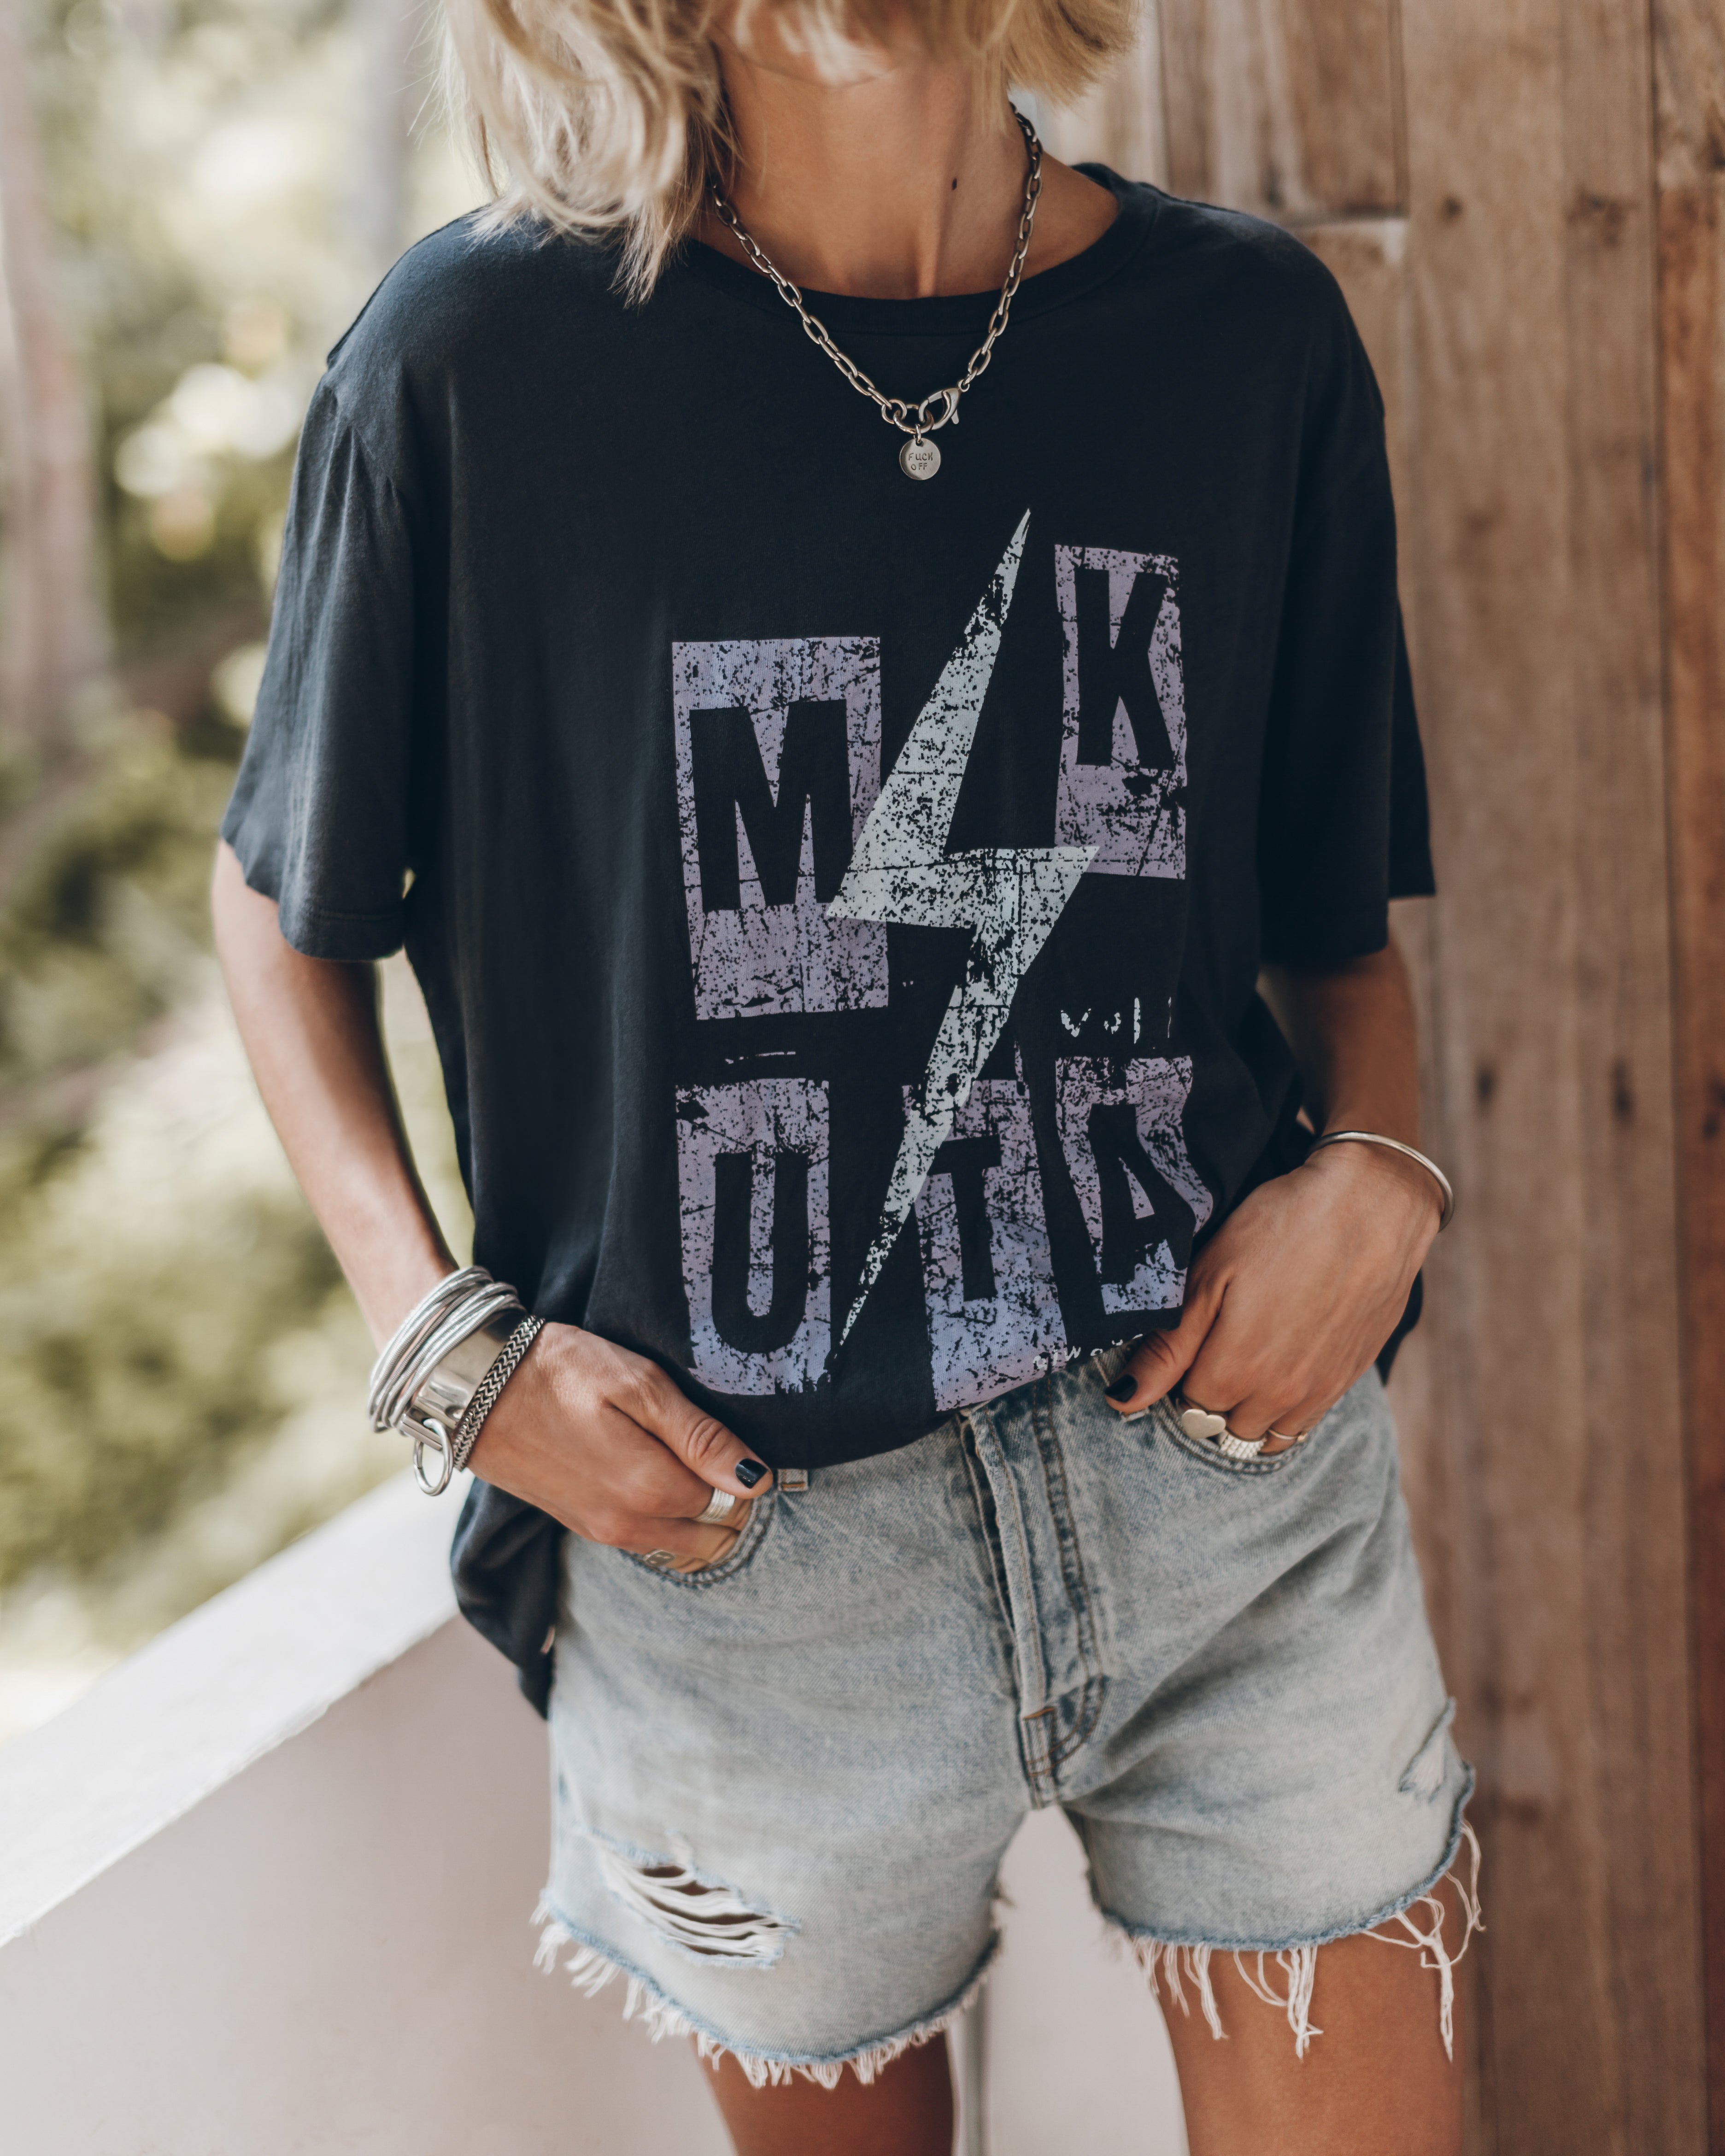 The Dark Relaxed T-Shirt